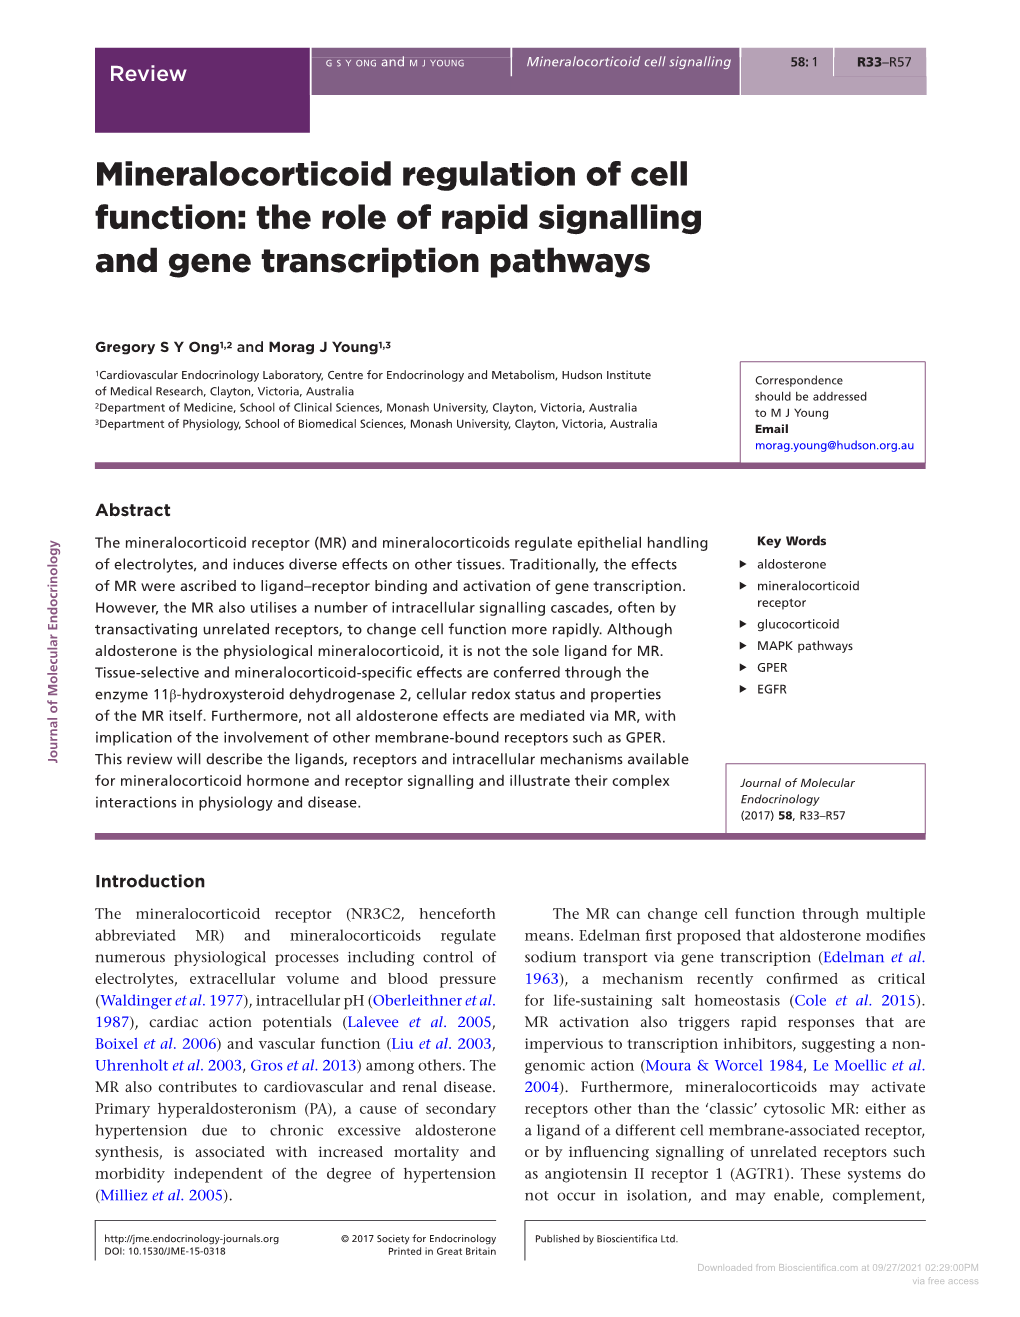 Mineralocorticoid Regulation of Cell Function: the Role of Rapid Signalling and Gene Transcription Pathways